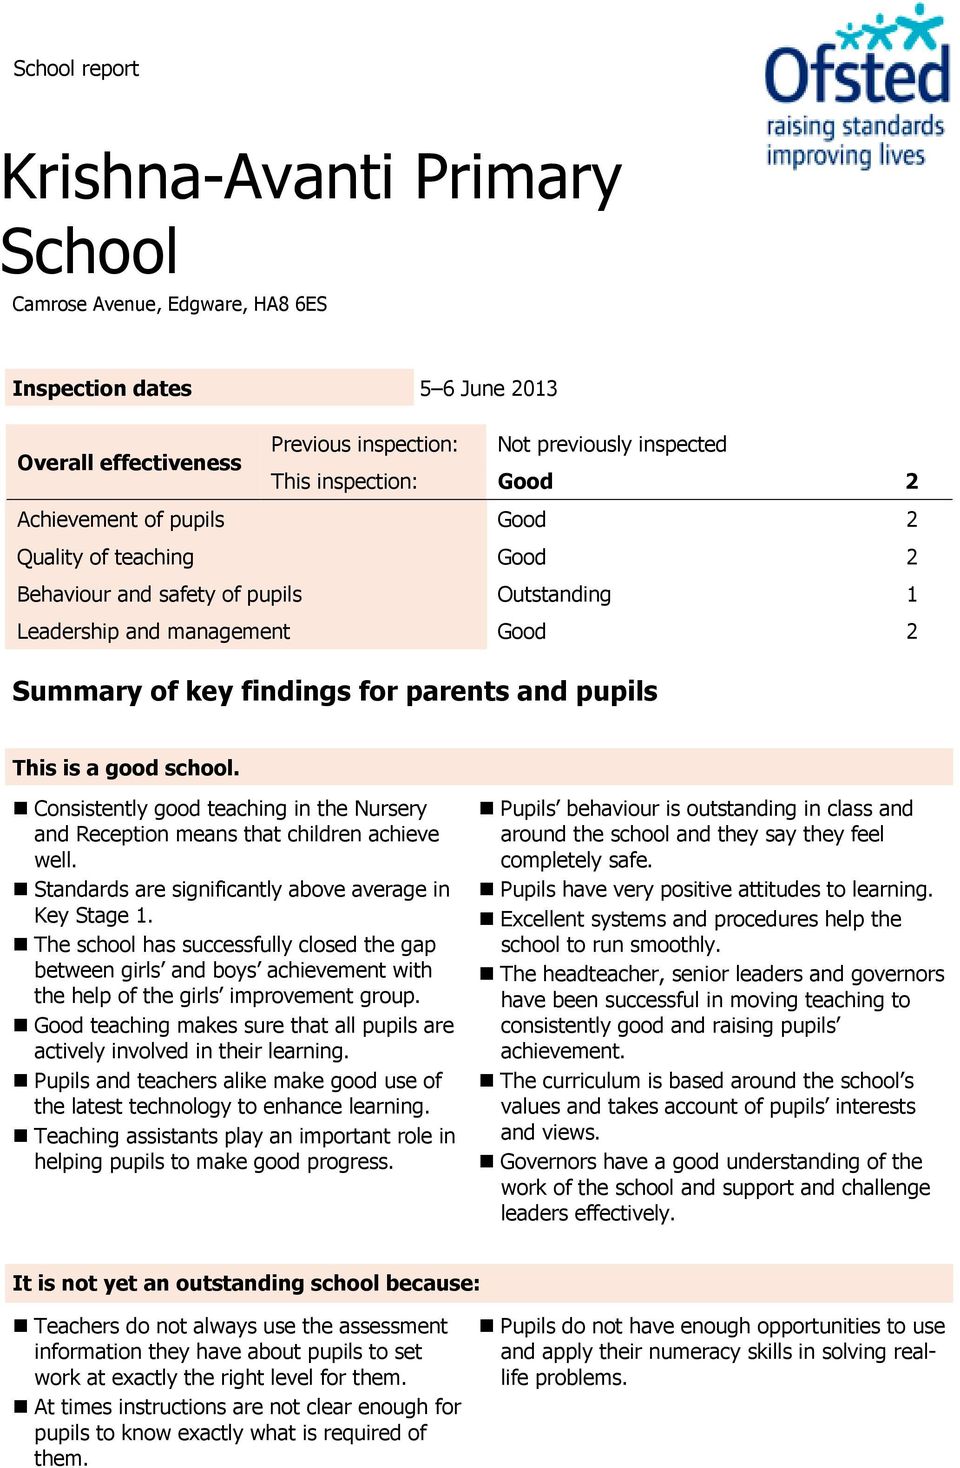 school. Consistently good teaching in the Nursery and Reception means that children achieve well. Standards are significantly above average in Key Stage 1.